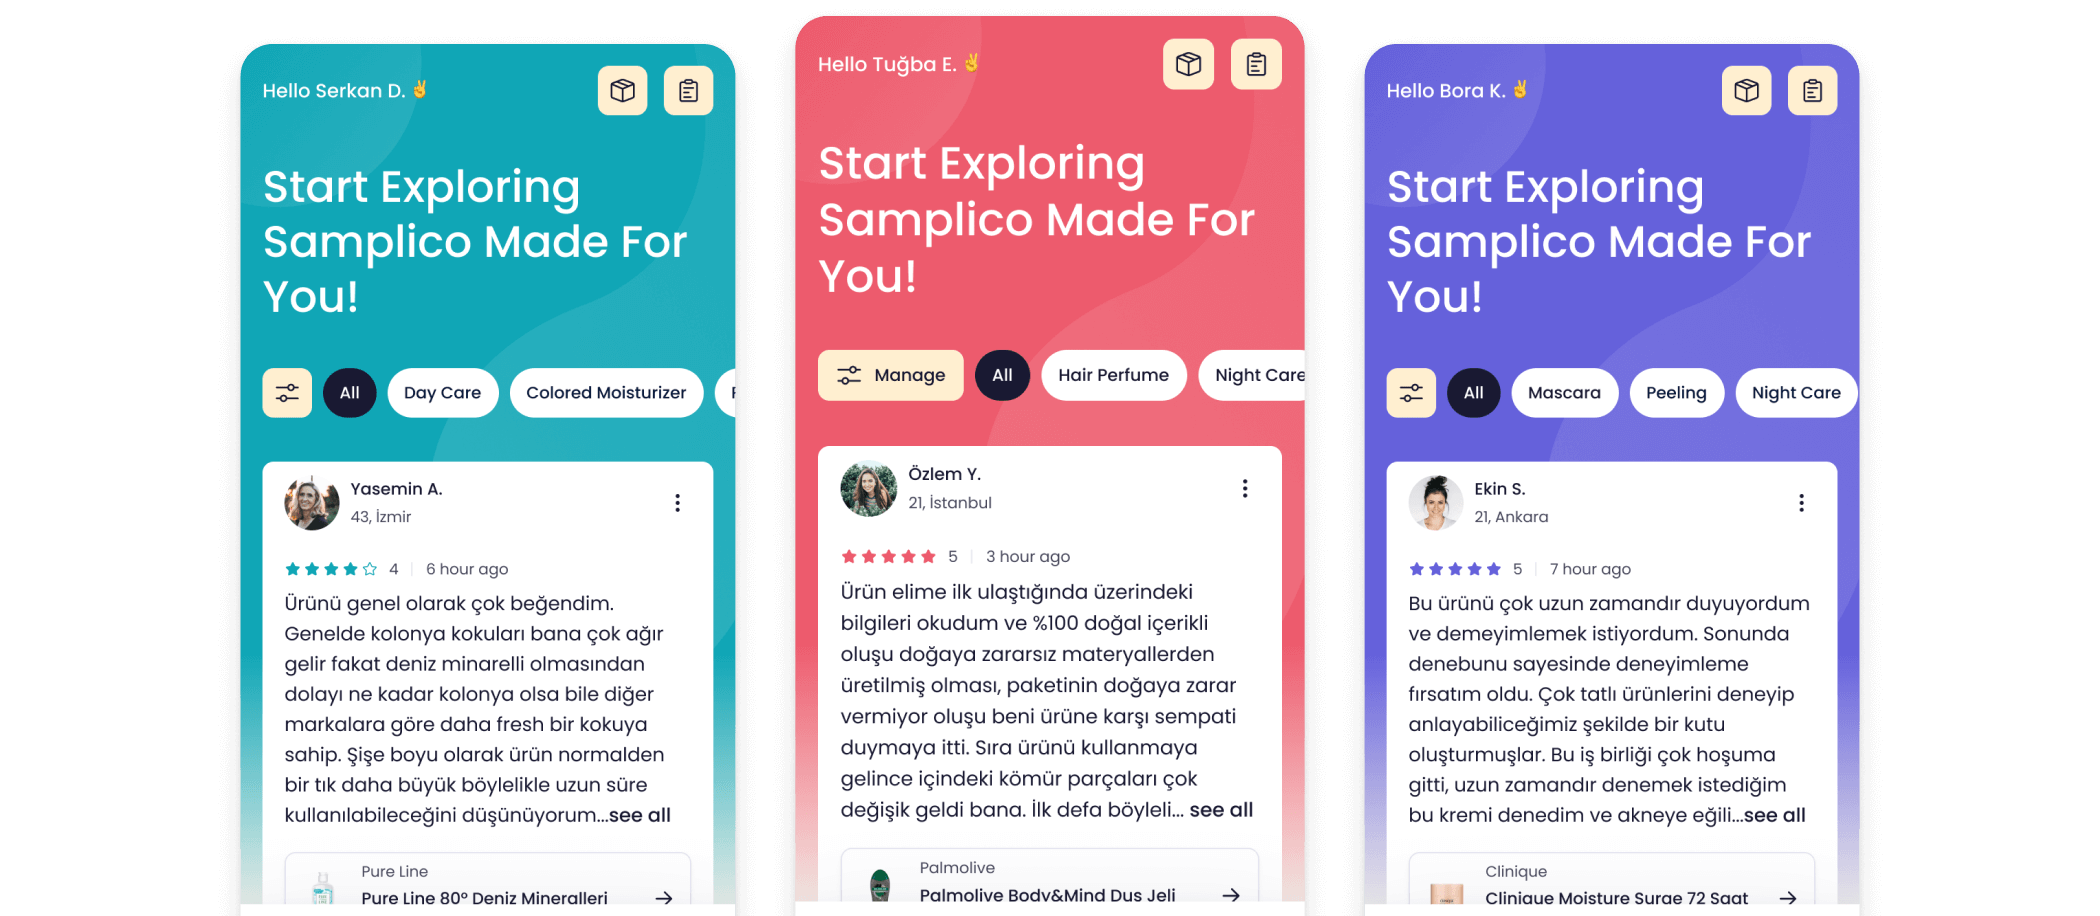 A strategic approach to mobile app design